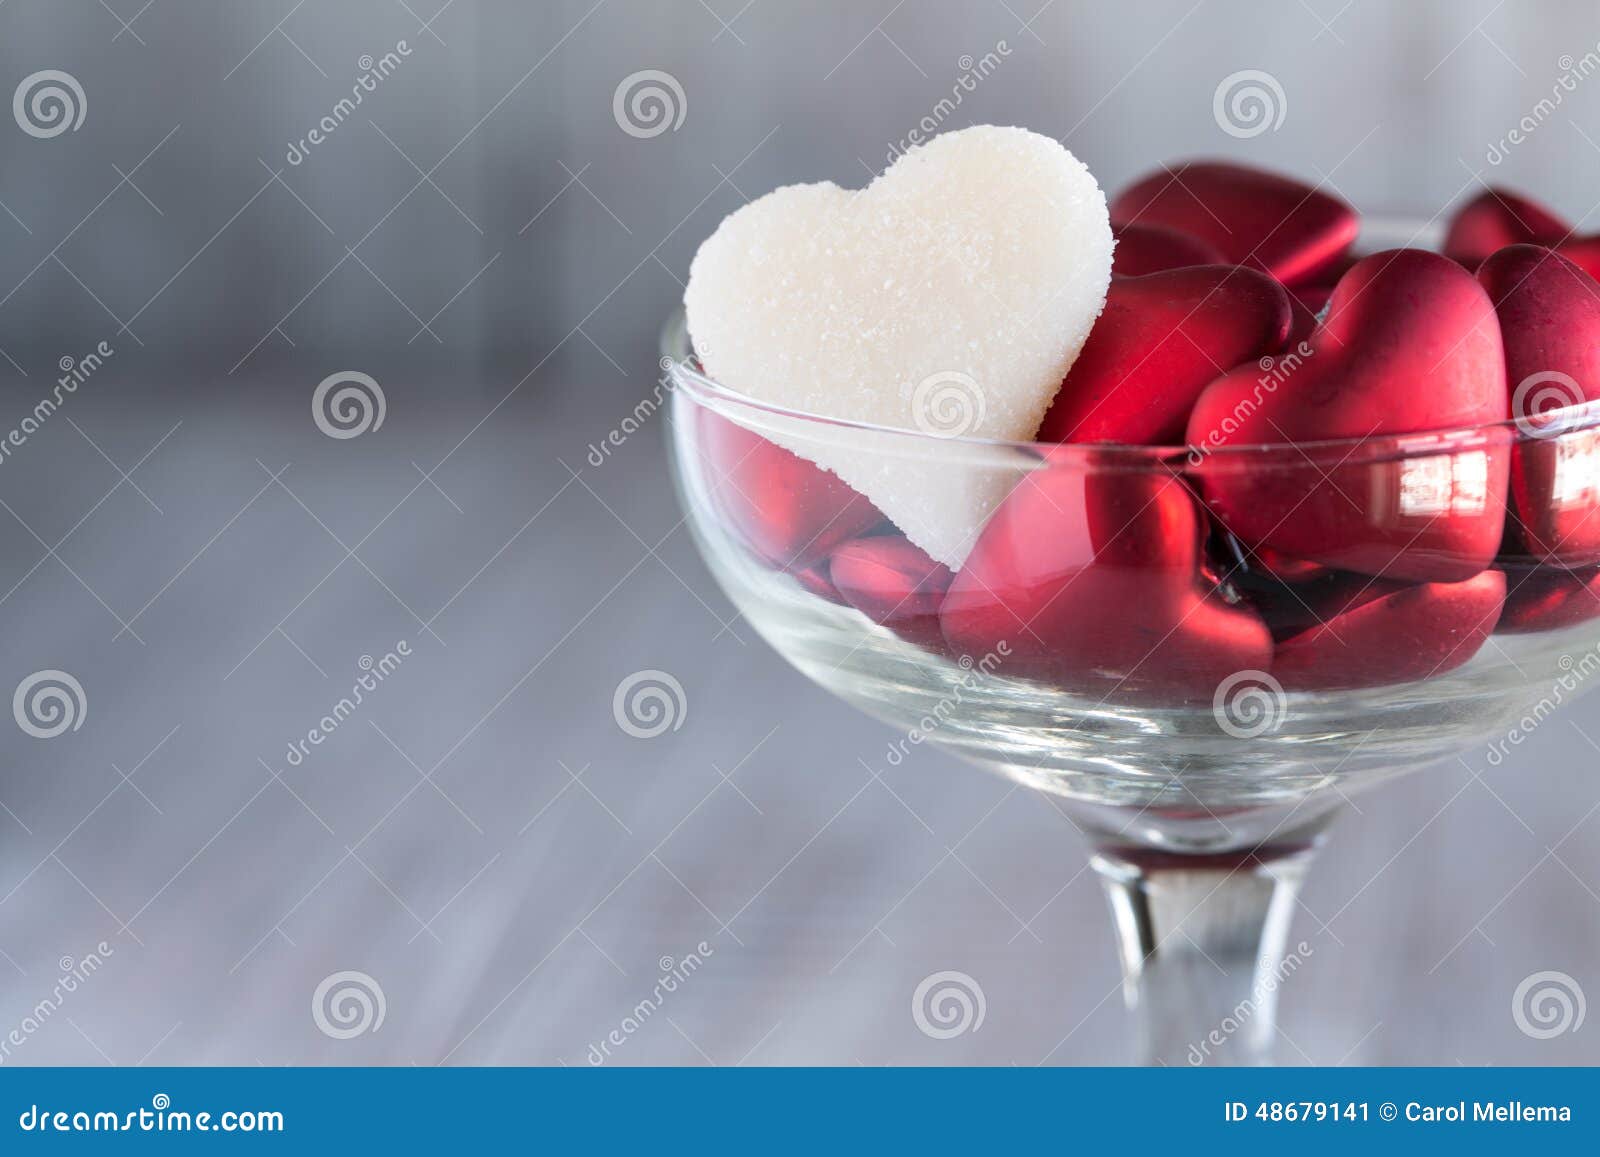 Valentines Day Candy Hearts In Wine Glass Love Symbols Stock Photo - Image: 486791411300 x 957